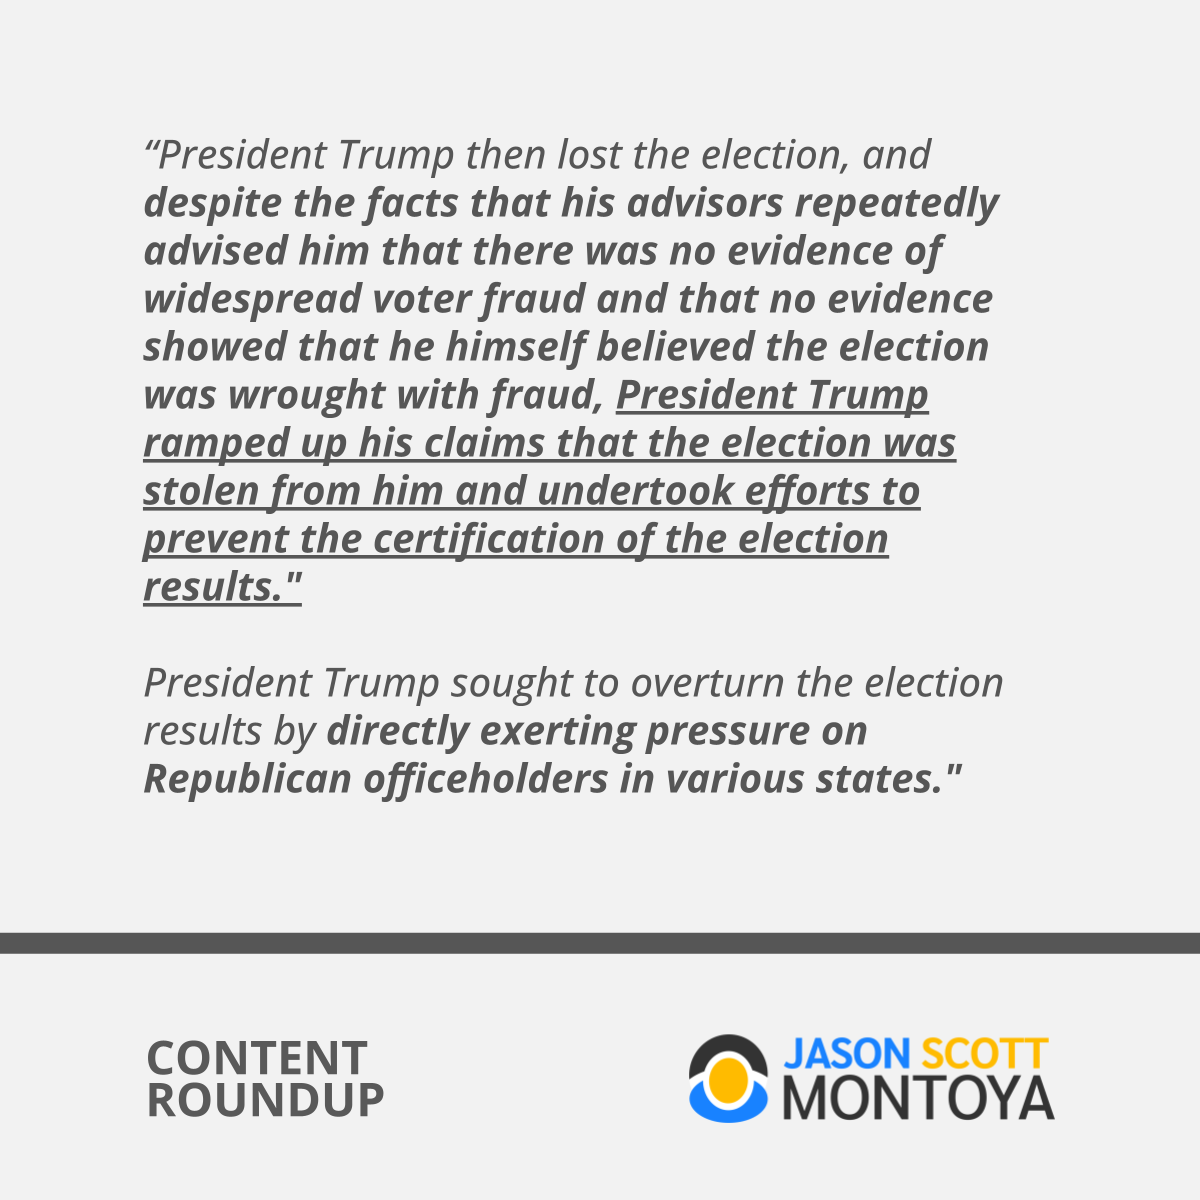 “President Trump then lost the election, and despite the facts that his advisors repeatedly advised him that there was no evidence of widespread voter fraud and that no evidence showed that he himself believed the election was wrought with fraud, President Trump ramped up his claims that the election was stolen from him and undertook efforts to prevent the certification of the election results.